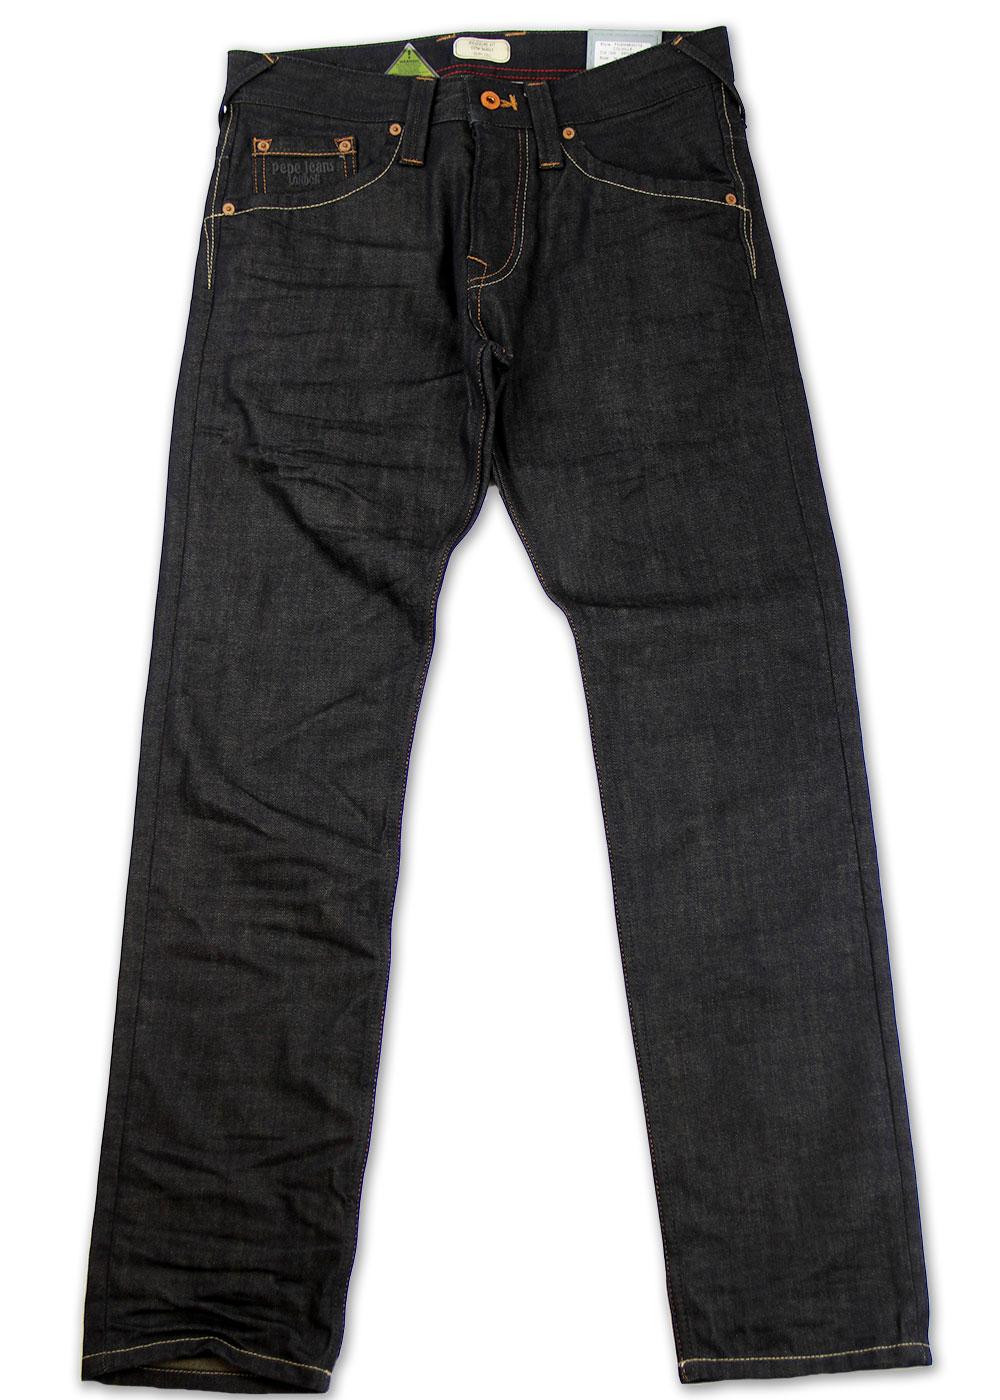 PEPE JEANS Colville Retro Indie Slim Tapered Jeans in Black/Blue